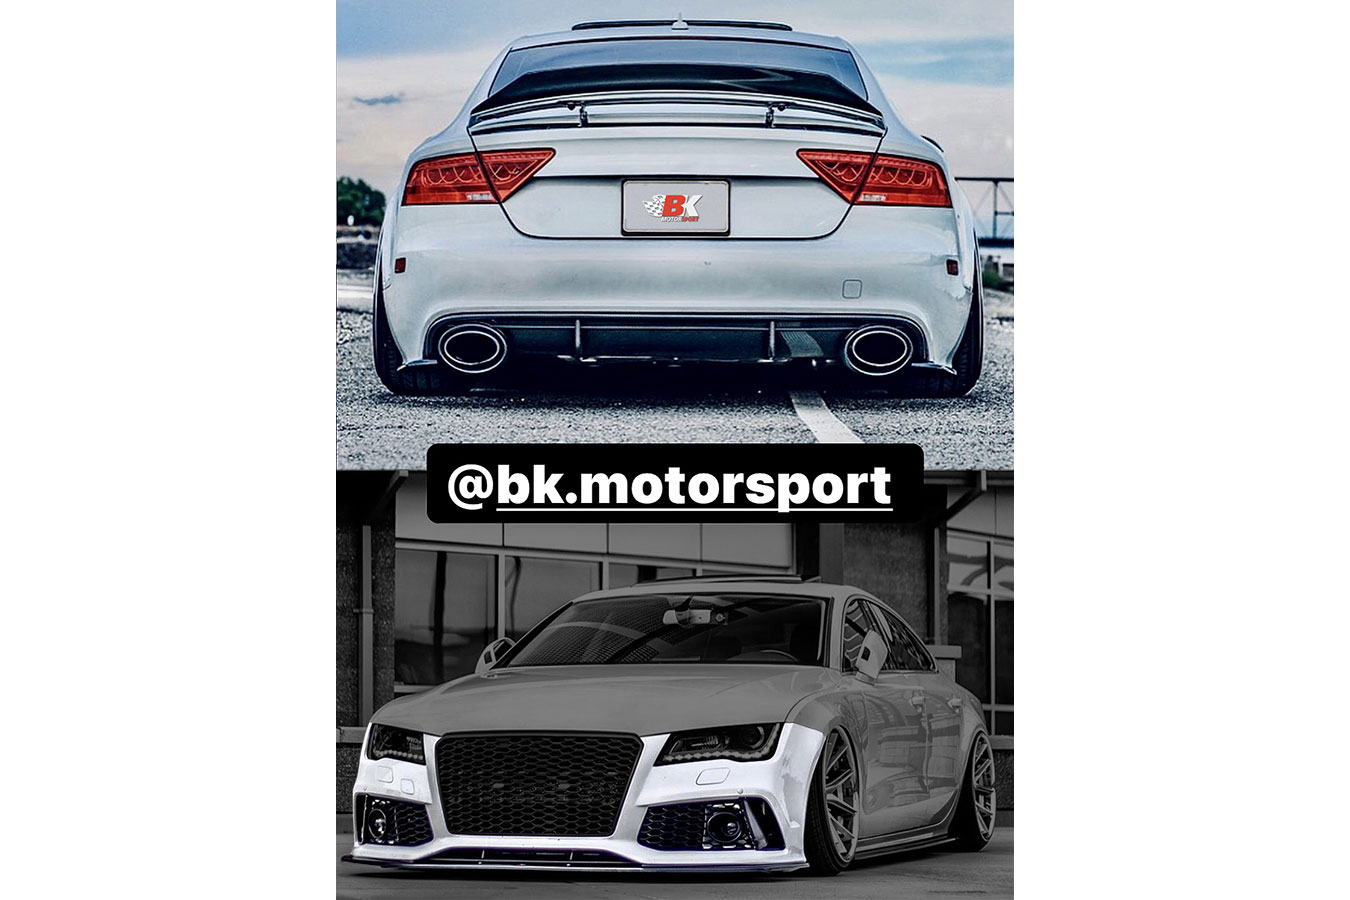 BKM Front Bumper Kit With Rear Diffuser RS Style Glossy Black Fits Audi A C BK Motorsport